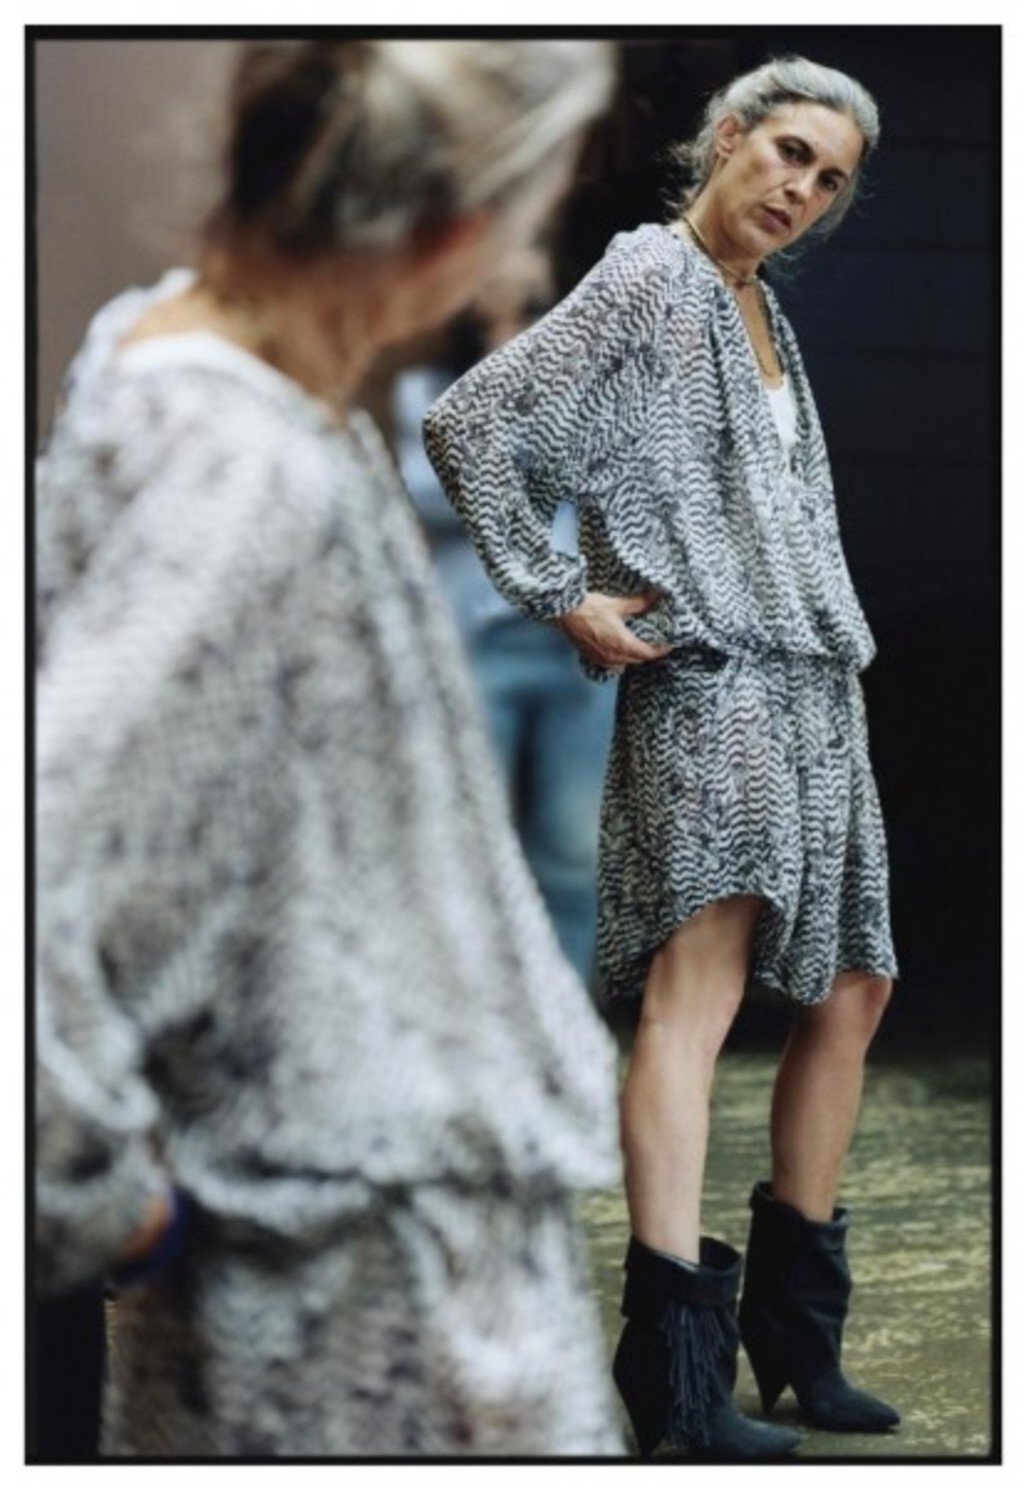 Isabel Marant wearing her own design for H&M. Photo via H&M's twitter. 